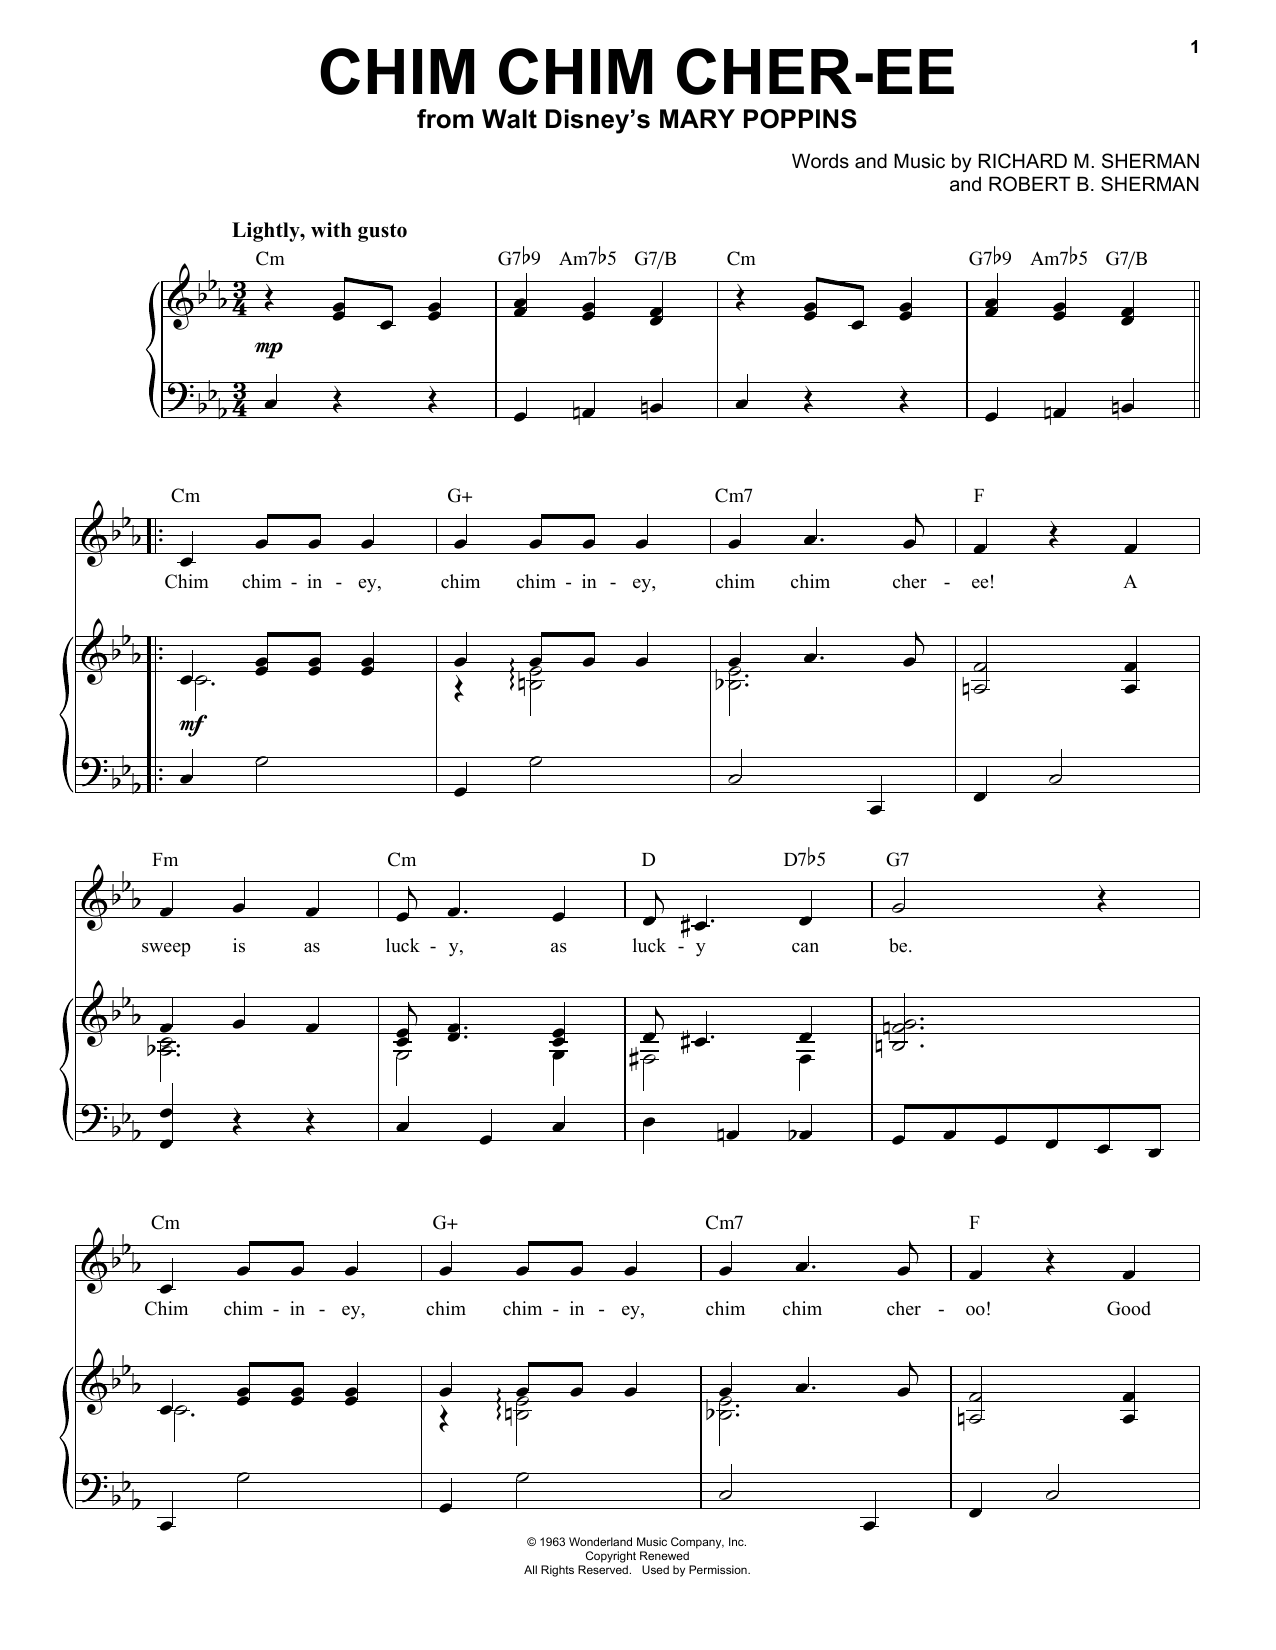 Robert B. Sherman Chim Chim Cher-ee (from Mary Poppins) sheet music notes and chords. Download Printable PDF.